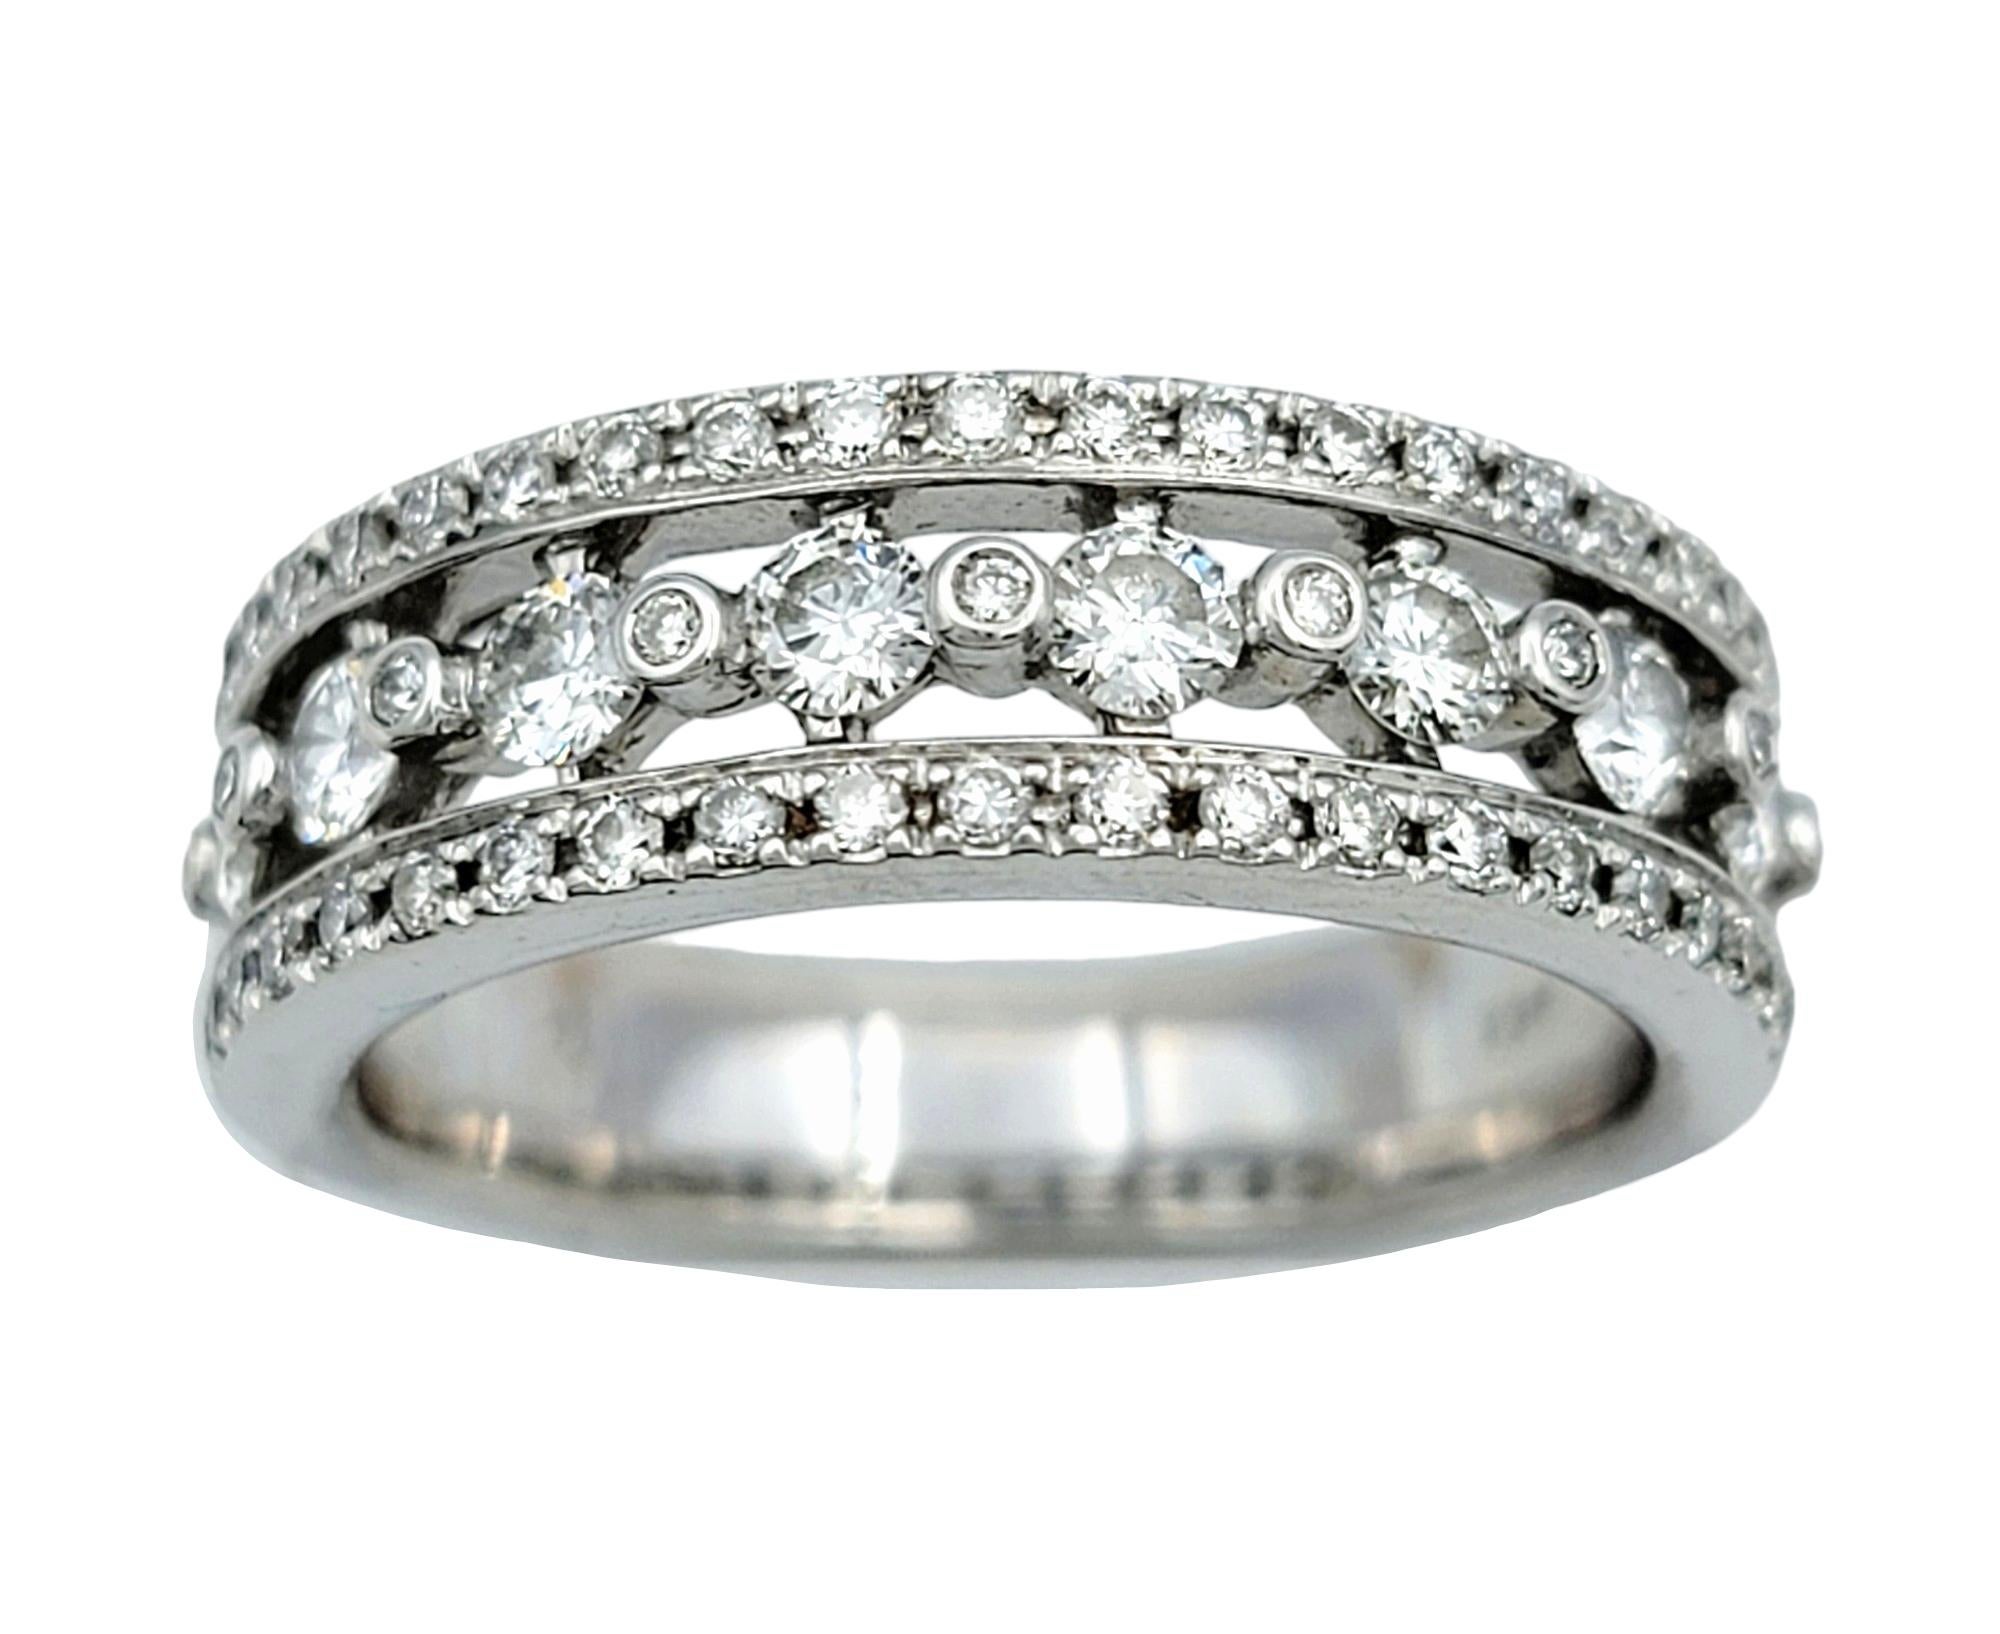 Ring Size: 6.5

This diamond band ring, crafted in 14 karat white gold, is a dazzling display of elegance and sophistication. Its design features a row of round diamonds of varying sizes meticulously set in a continuous line, creating a radiant